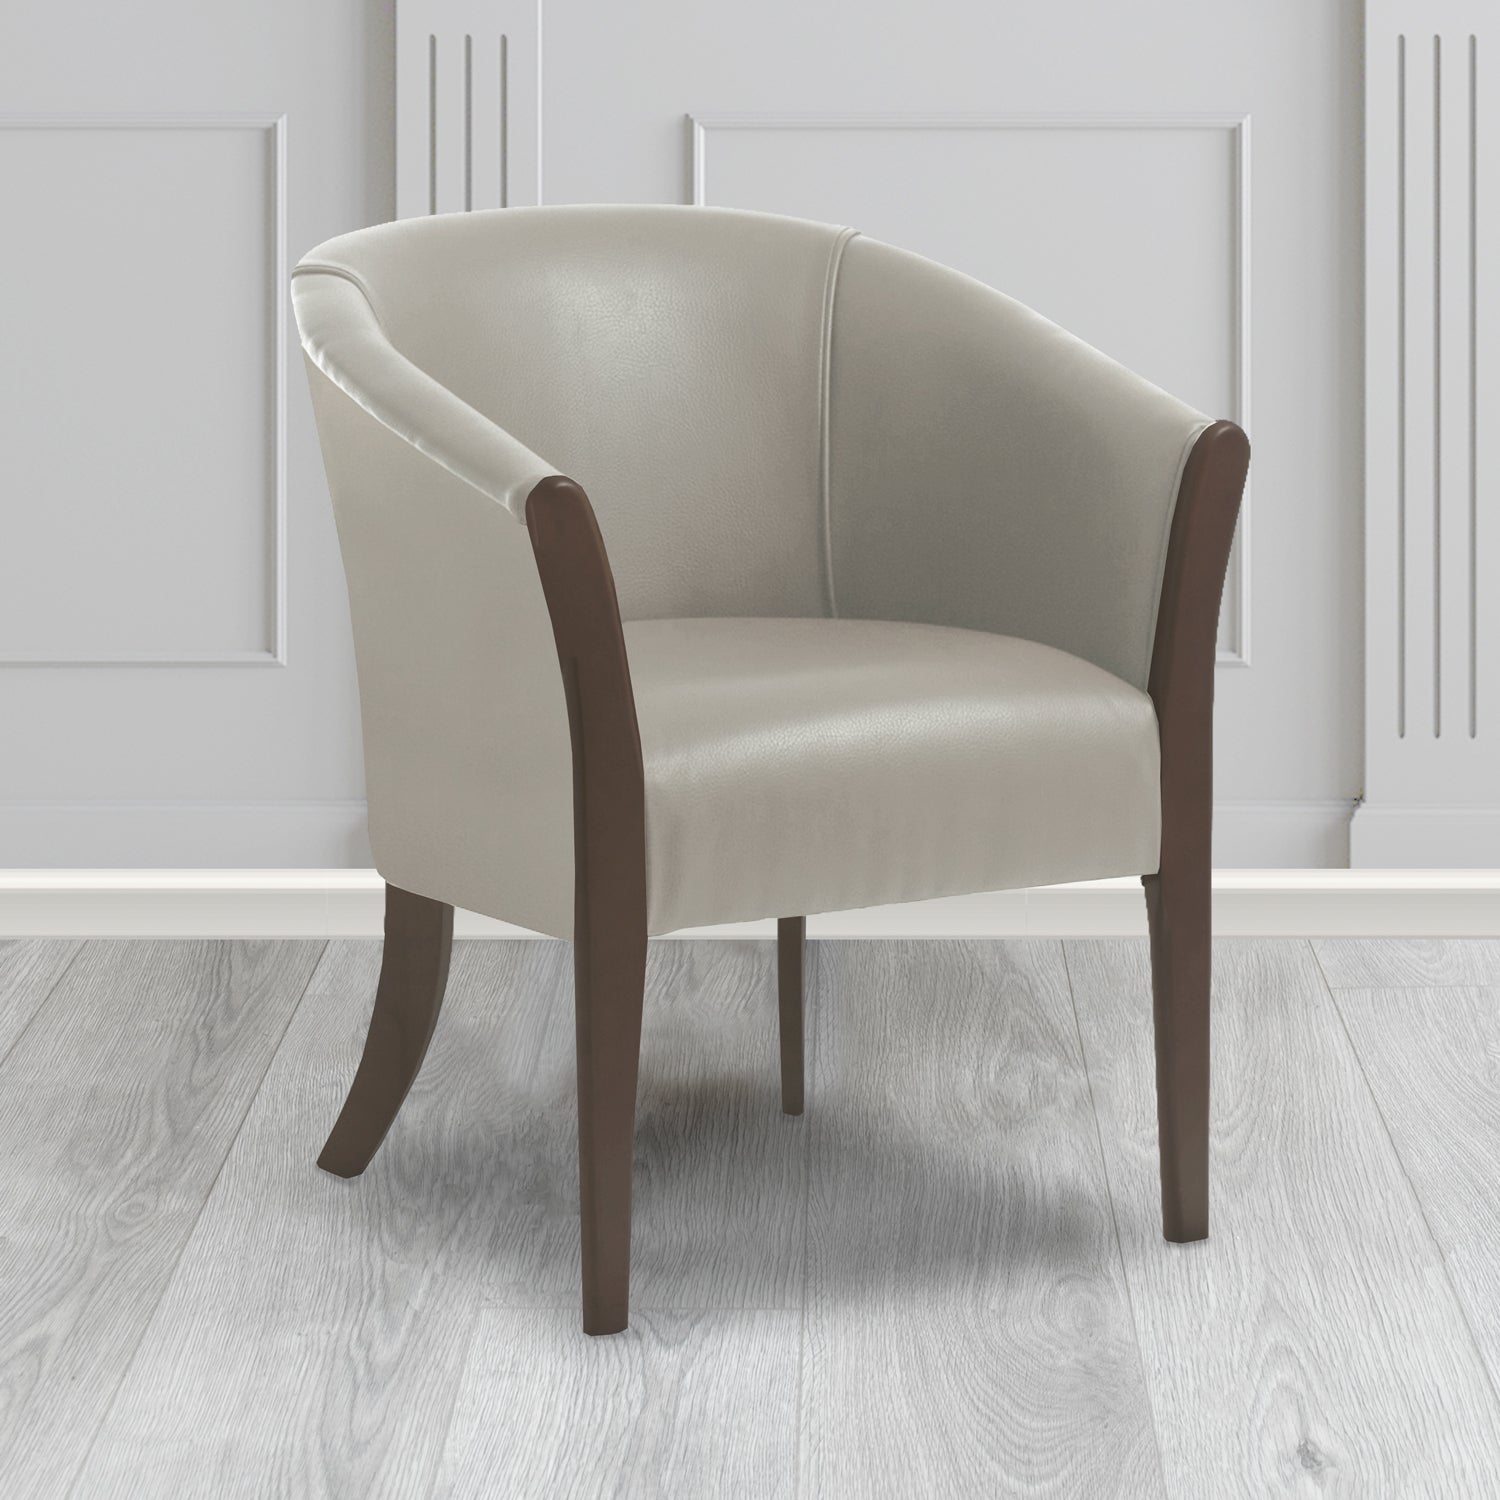 Hamilton Tub Chair in Agua Paint Pot Grey Crib 5 Faux Leather - Antimicrobial, Stain Resistant & Waterproof - The Tub Chair Shop